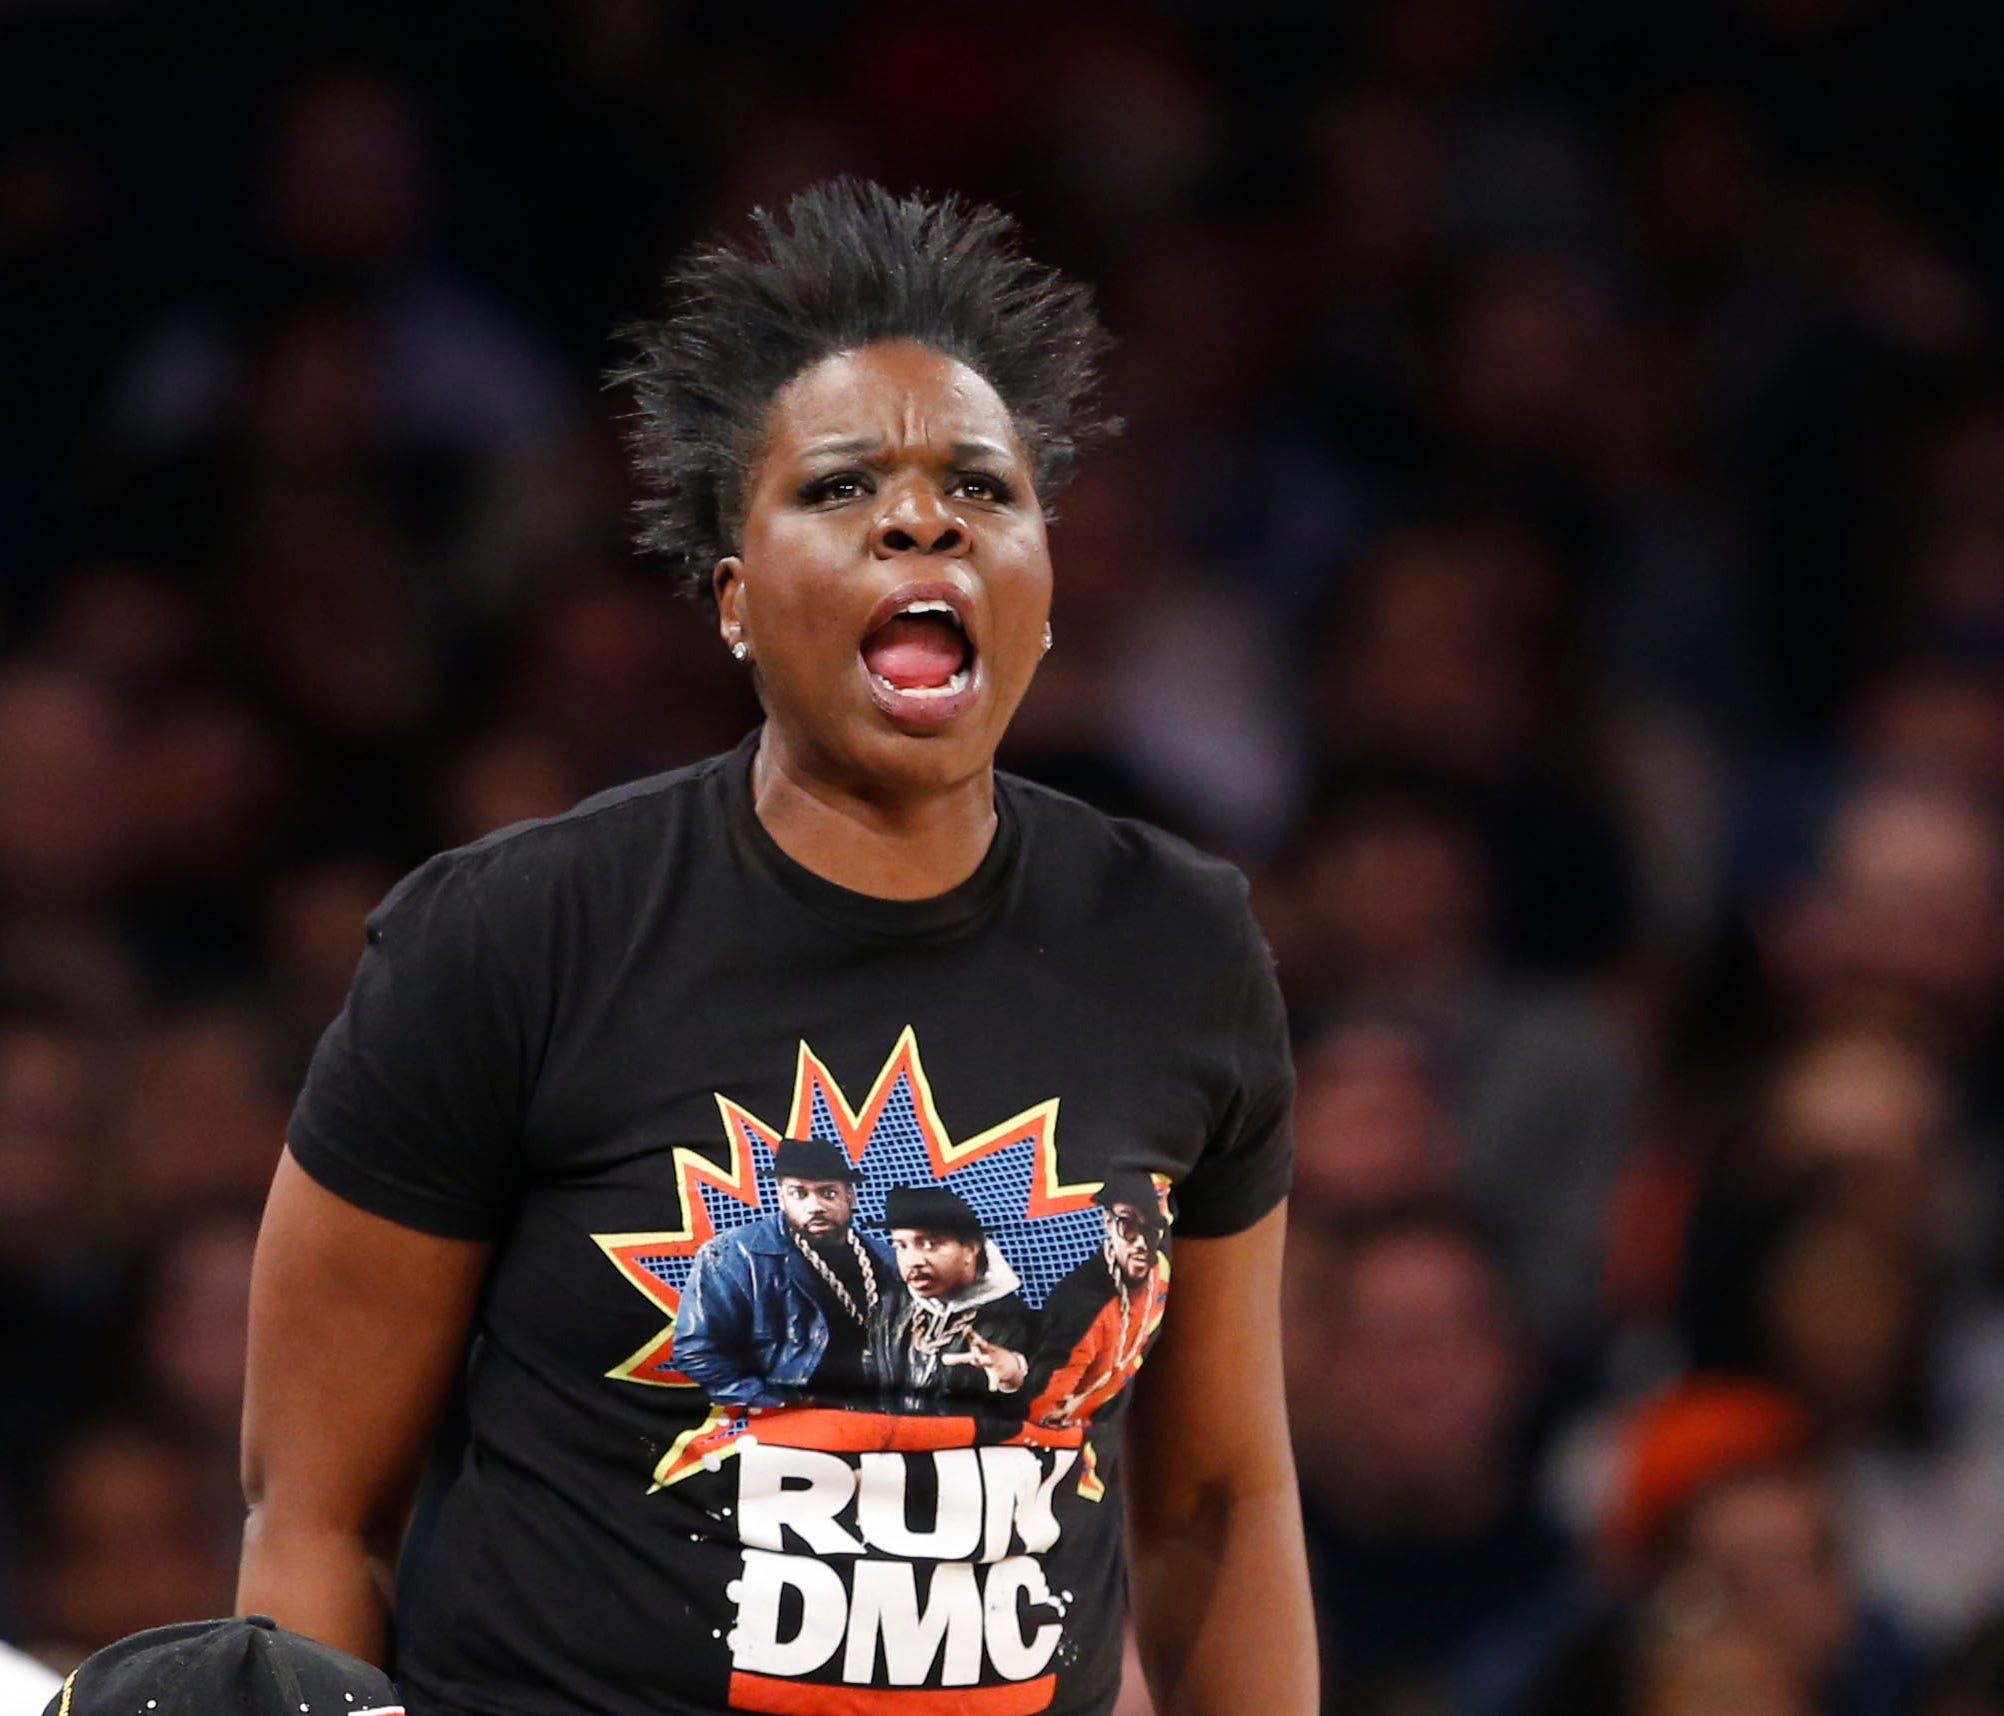 Dec 10, 2017; New York, NY, USA; Saturday Night Live cast member Leslie Jones cheers for the New York Knicks during a game against the Atlanta Hawks at Madison Square Garden. Mandatory Credit: Noah K. Murray-USA TODAY Sports ORG XMIT: USATSI-362609 O